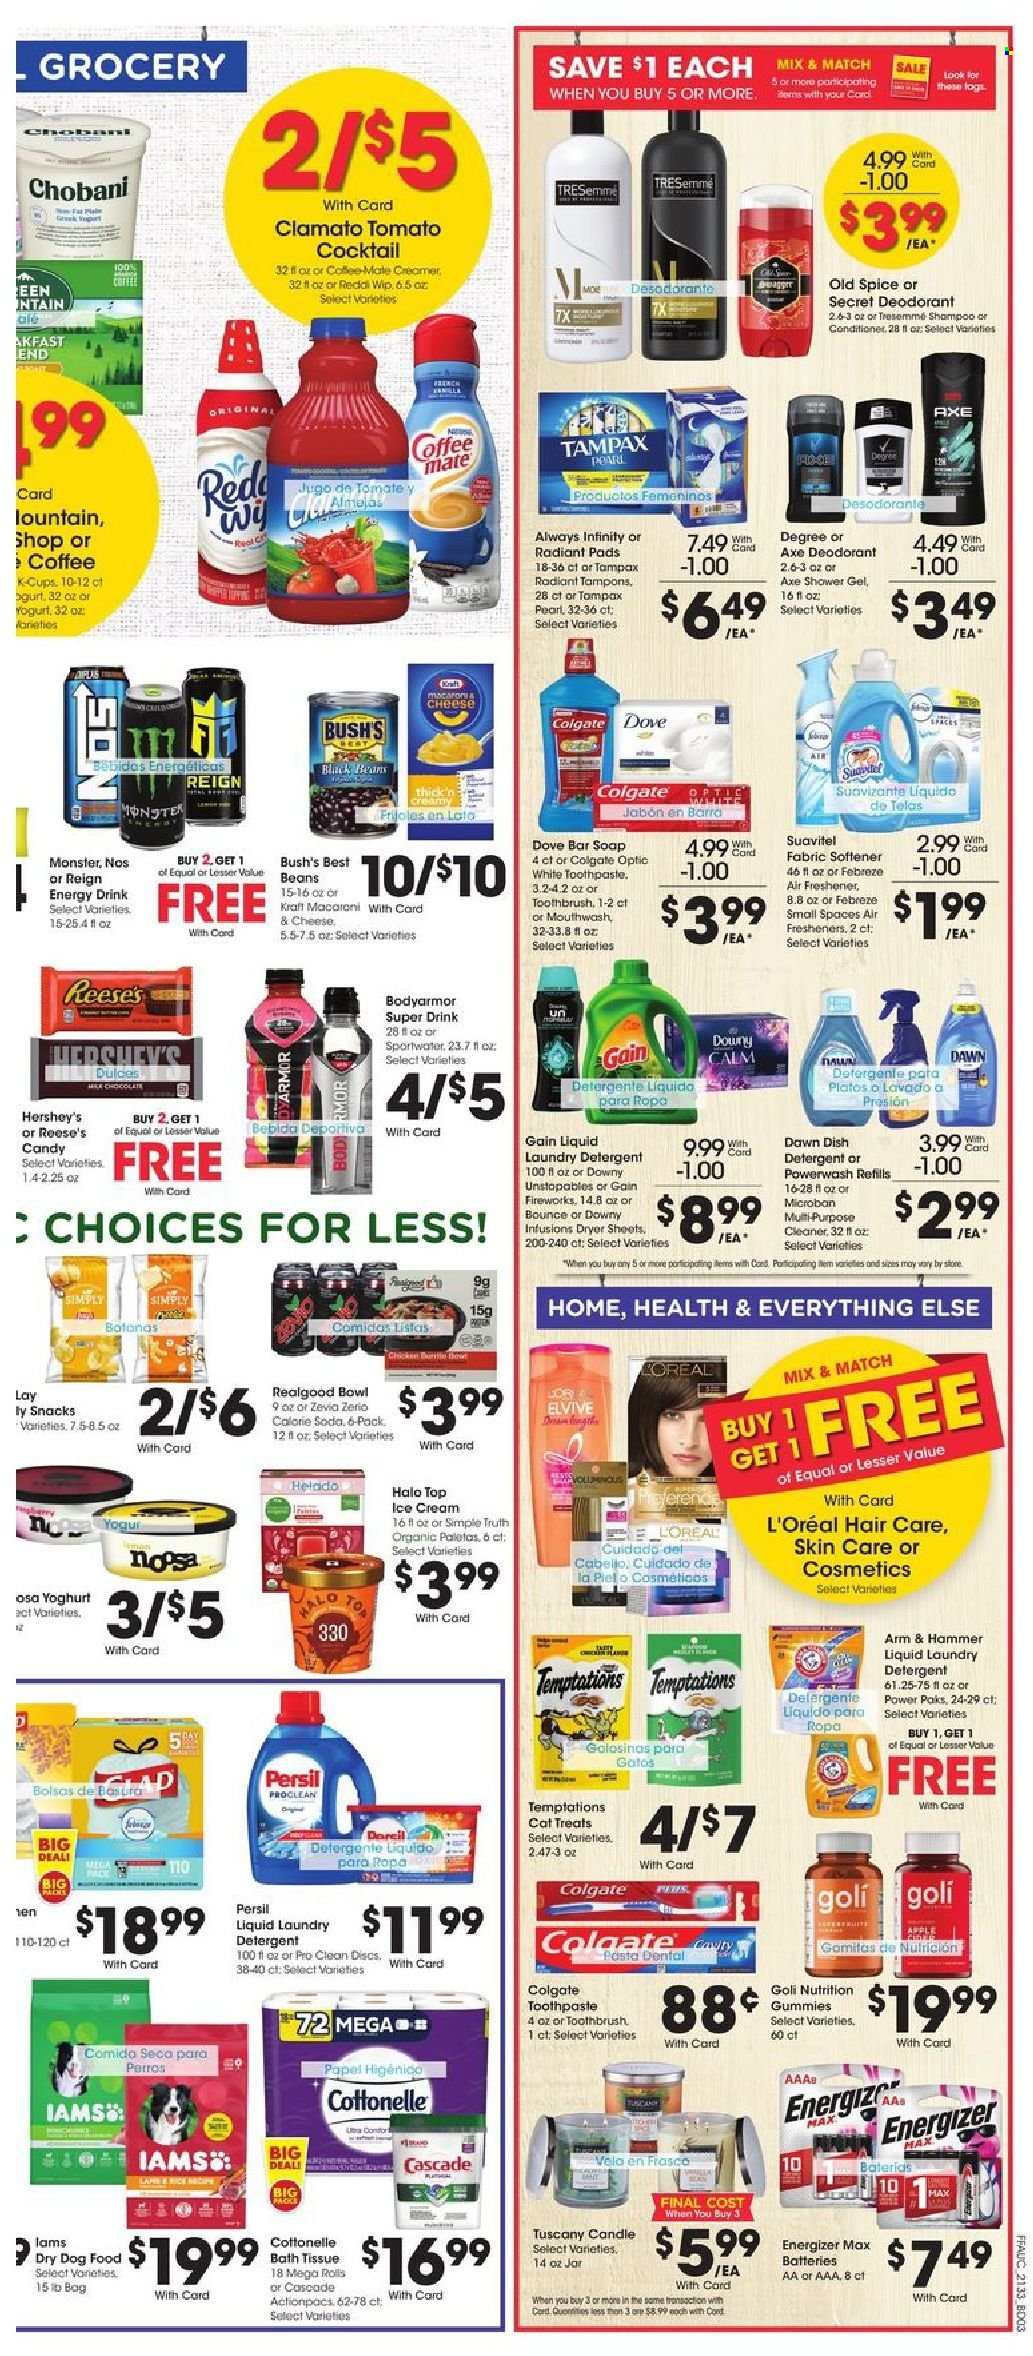 thumbnail - Fry’s Flyer - 09/15/2021 - 09/21/2021 - Sales products - pasta, Kraft®, yoghurt, Chobani, ice cream, Reese's, snack, ARM & HAMMER, spice, energy drink, Monster, Clamato, soda, coffee, Dove, bath tissue, Cottonelle, detergent, Febreze, Gain, cleaner, Cascade, Unstopables, Persil, fabric softener, laundry detergent, dryer sheets, Gain Fireworks, Downy Laundry, shampoo, shower gel, Old Spice, soap bar, soap, Colgate, toothbrush, toothpaste, mouthwash, Tampax, tampons, Always Infinity, L’Oréal, TRESemmé, anti-perspirant, deodorant, bowl, candle, air freshener, battery, Energizer, animal food, dog food, dry dog food, Iams. Page 6.